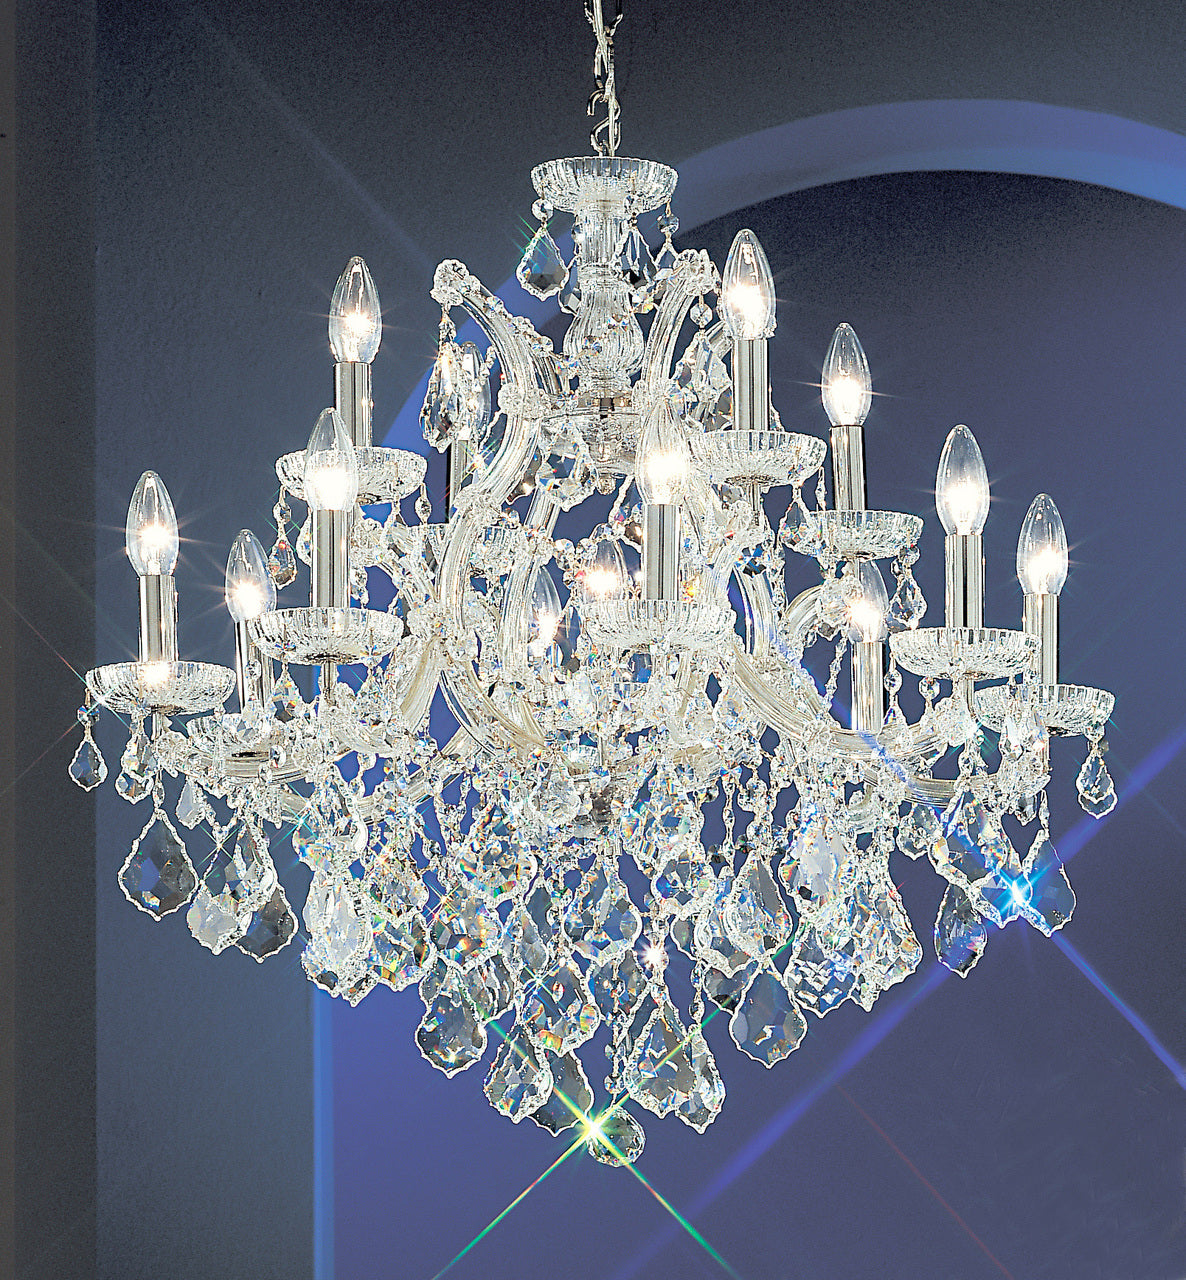 Classic Lighting 8133 OWG S Maria Theresa Traditional Crystal Chandelier in Olde World Gold (Imported from Italy)